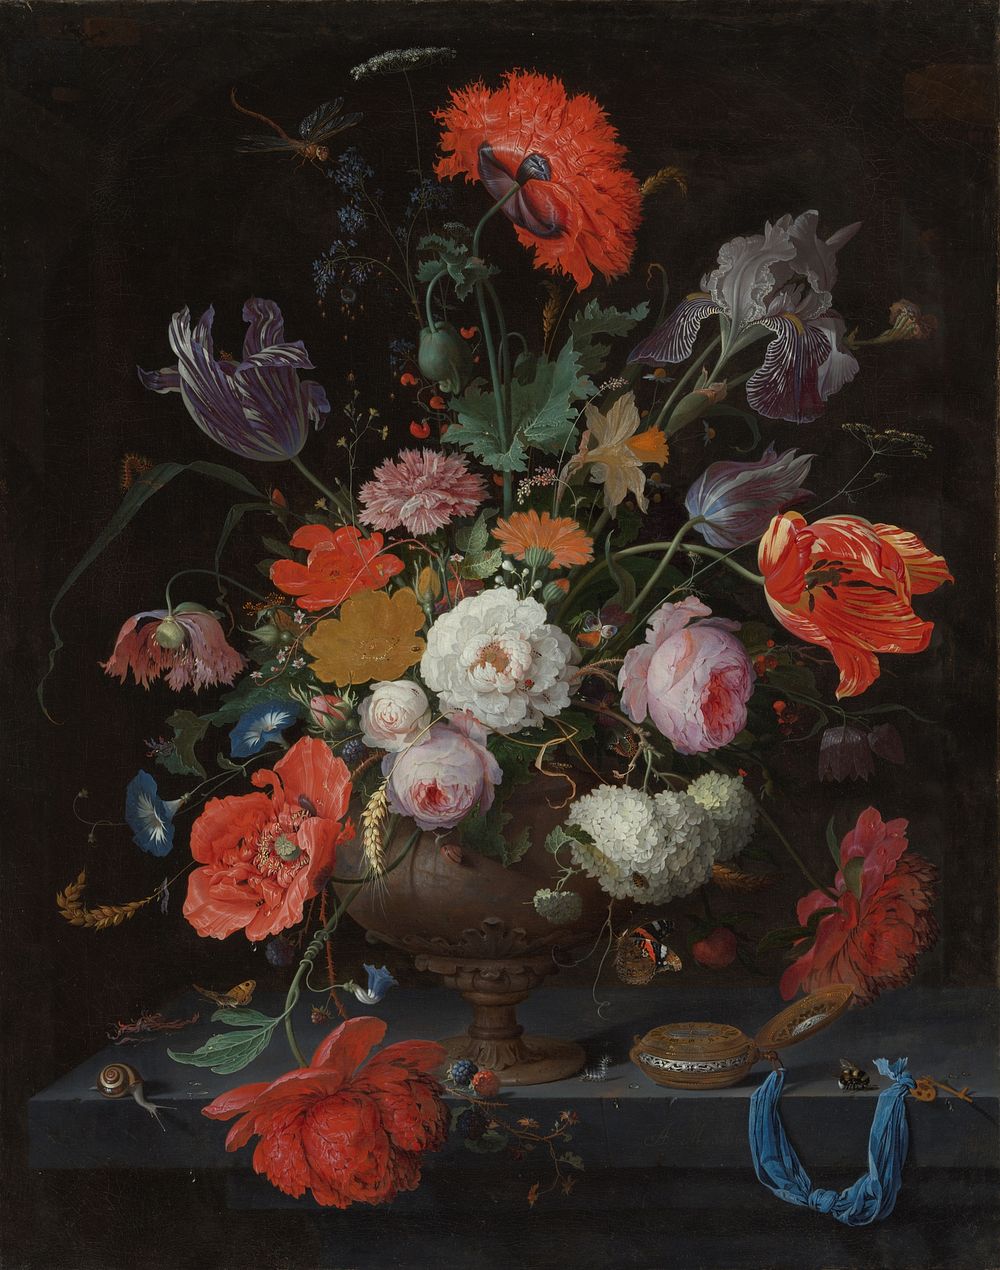 Still Life with Flowers and a Watch (c. 1660 - c. 1679) by Abraham Mignon